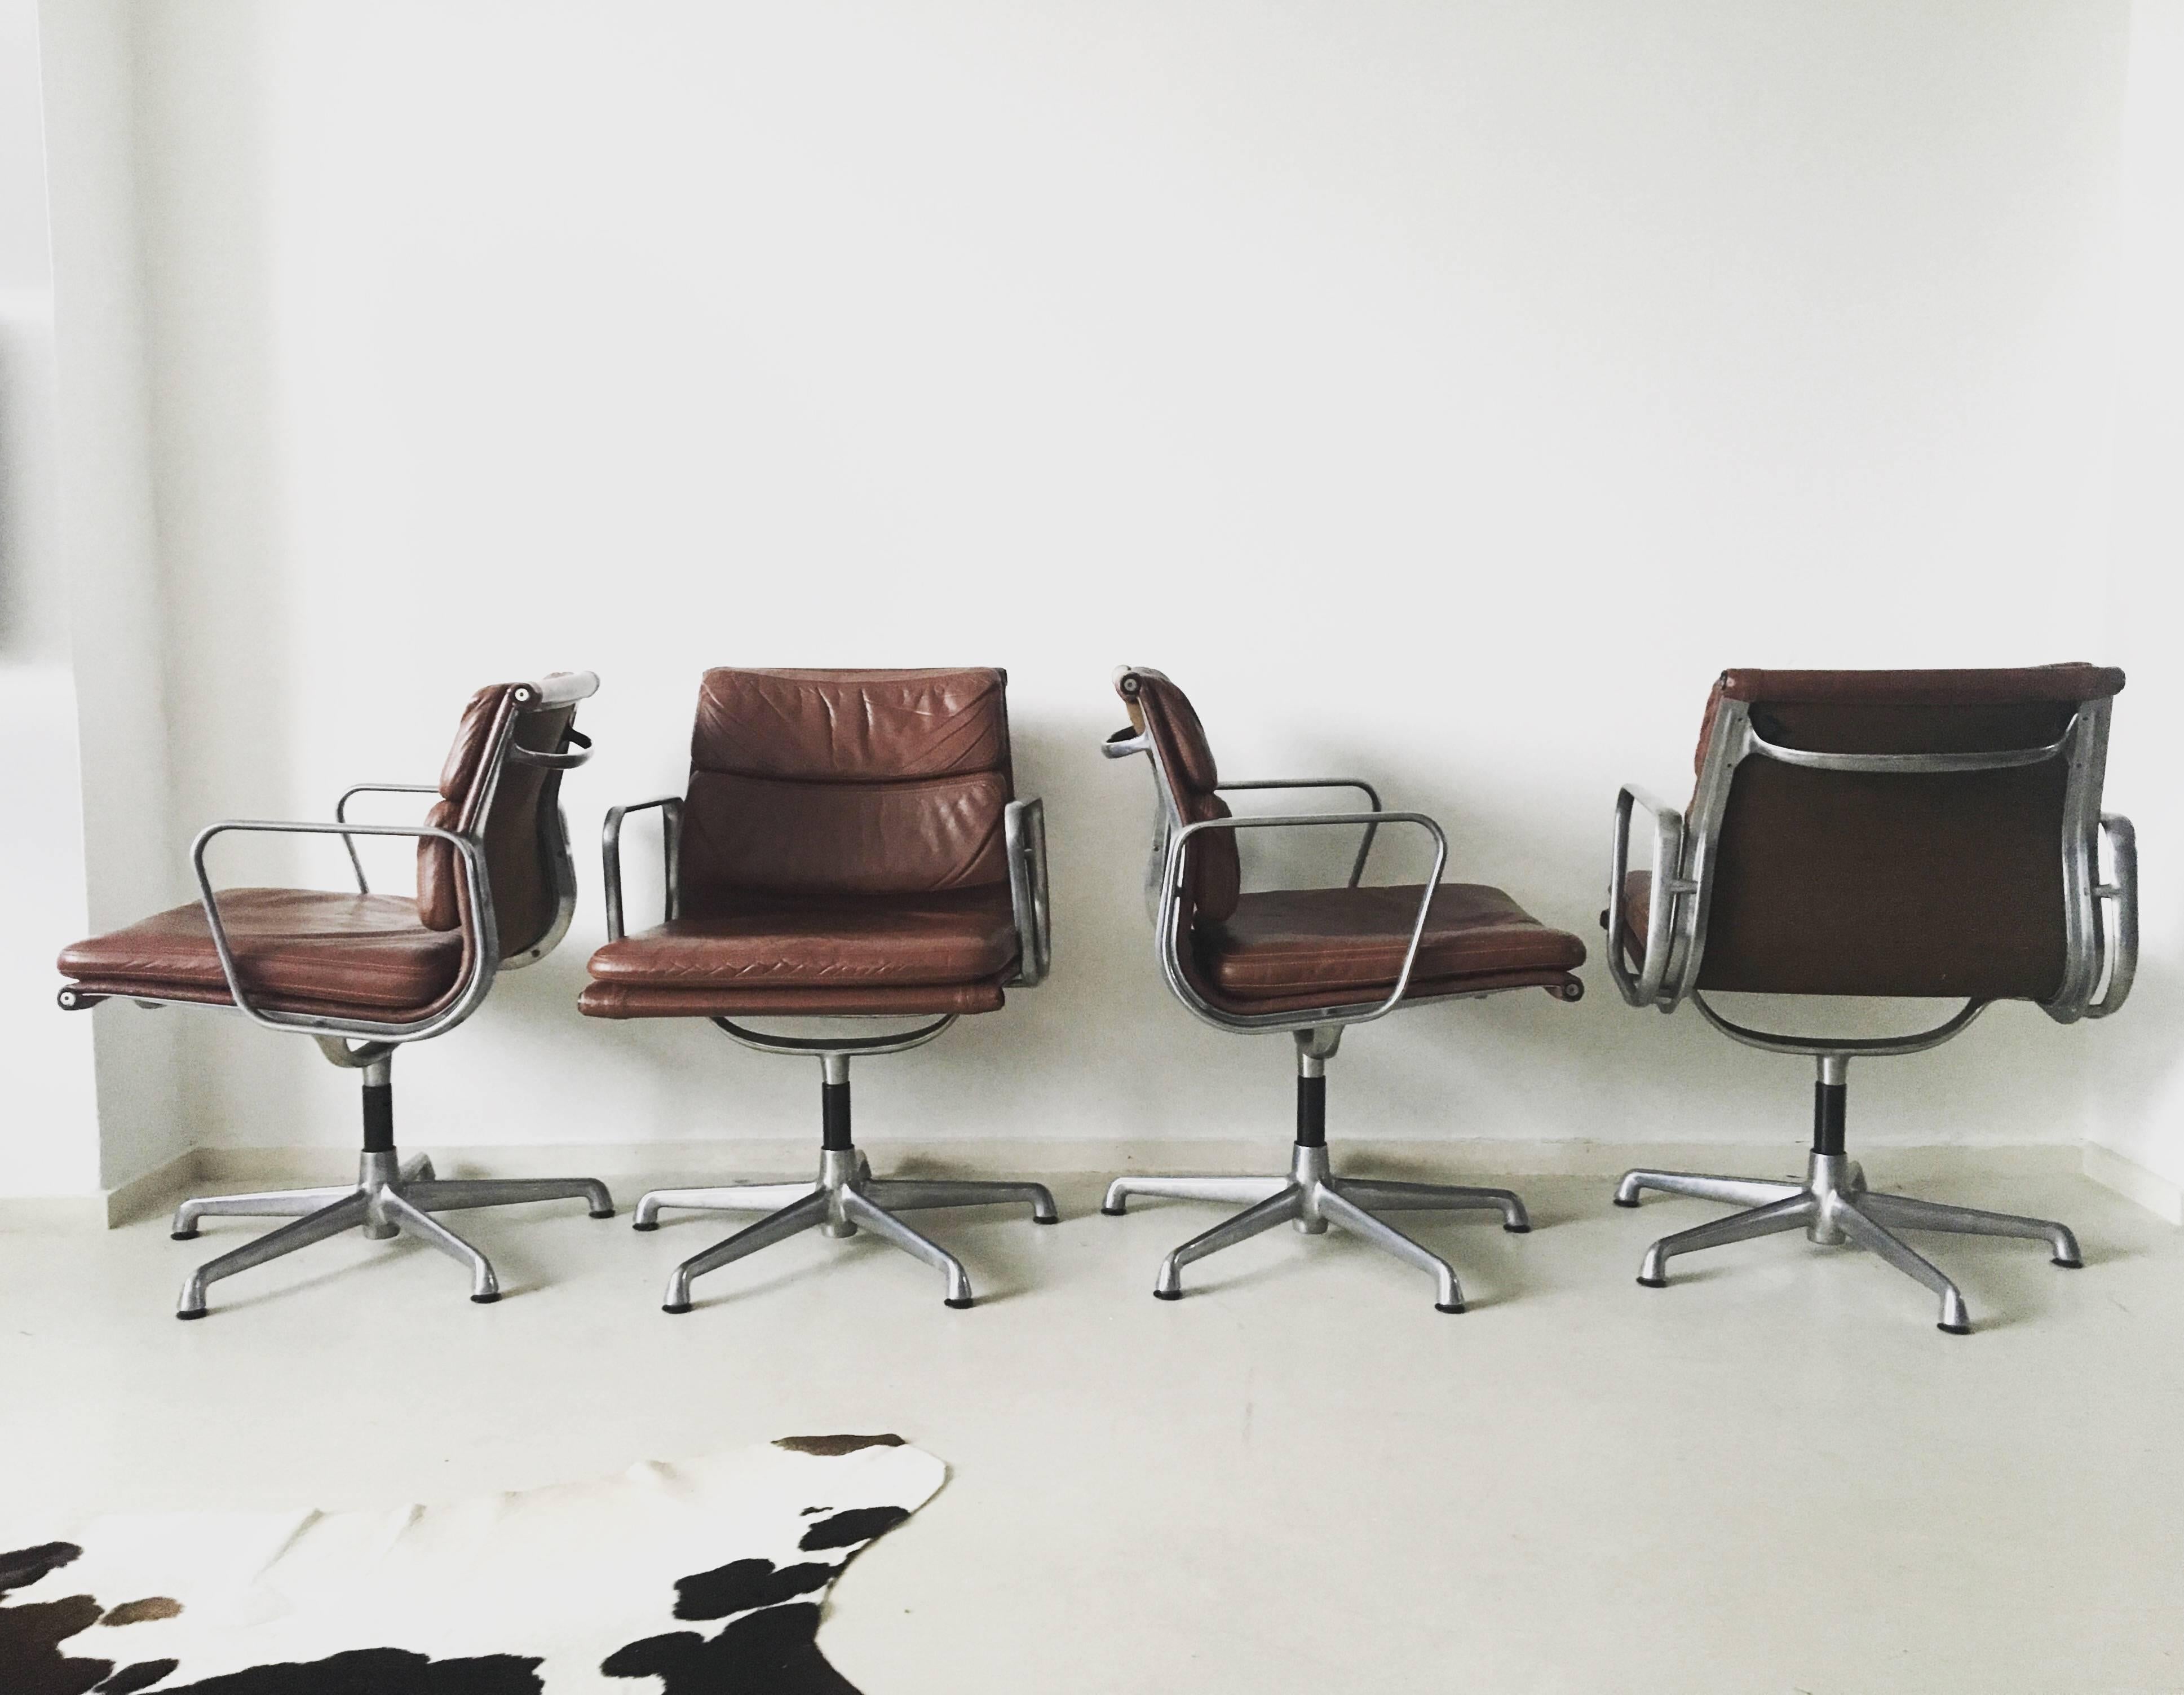 These swivel chairs were designed by Charles Eames in the 1960s and produced by ICF, Italy under the licence of Herman Miller.

They come with a polished Aluminium base and rare 5 star feet. It's very comfortable seating is in cognac colored